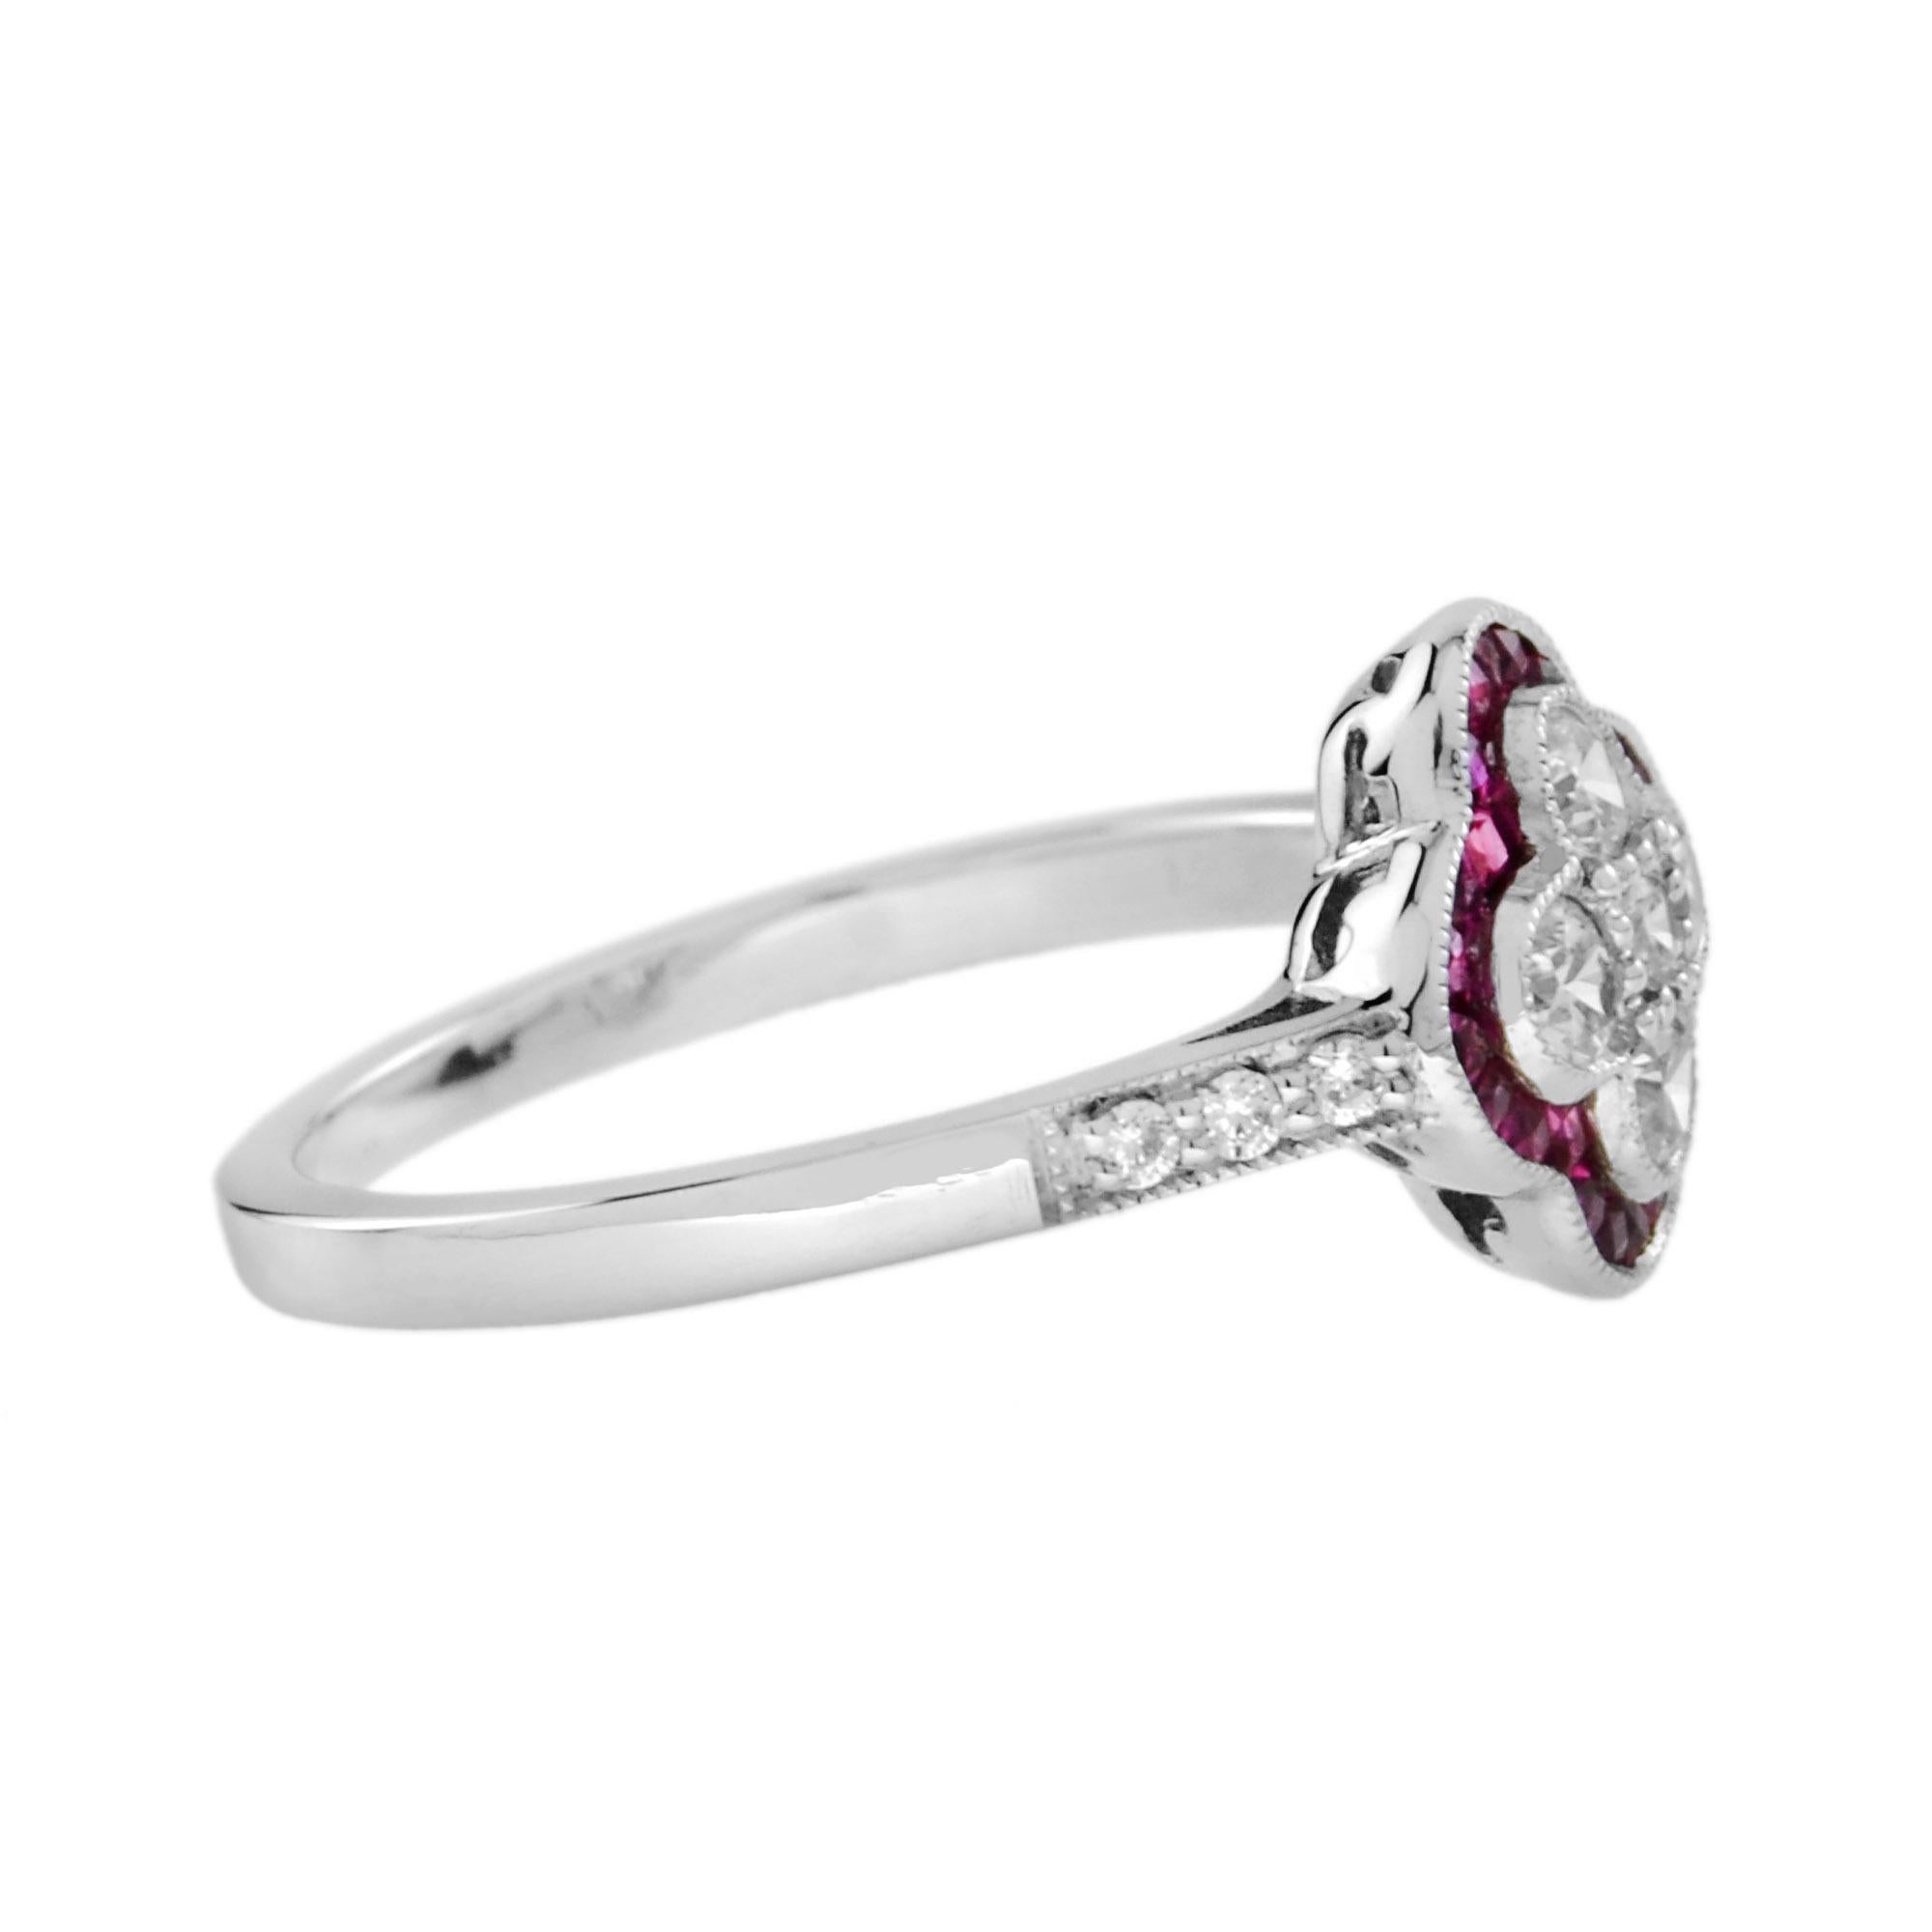 For Sale:  Diamond and Ruby Art Deco Style Floral Cluster Ring in 18K White Gold 3